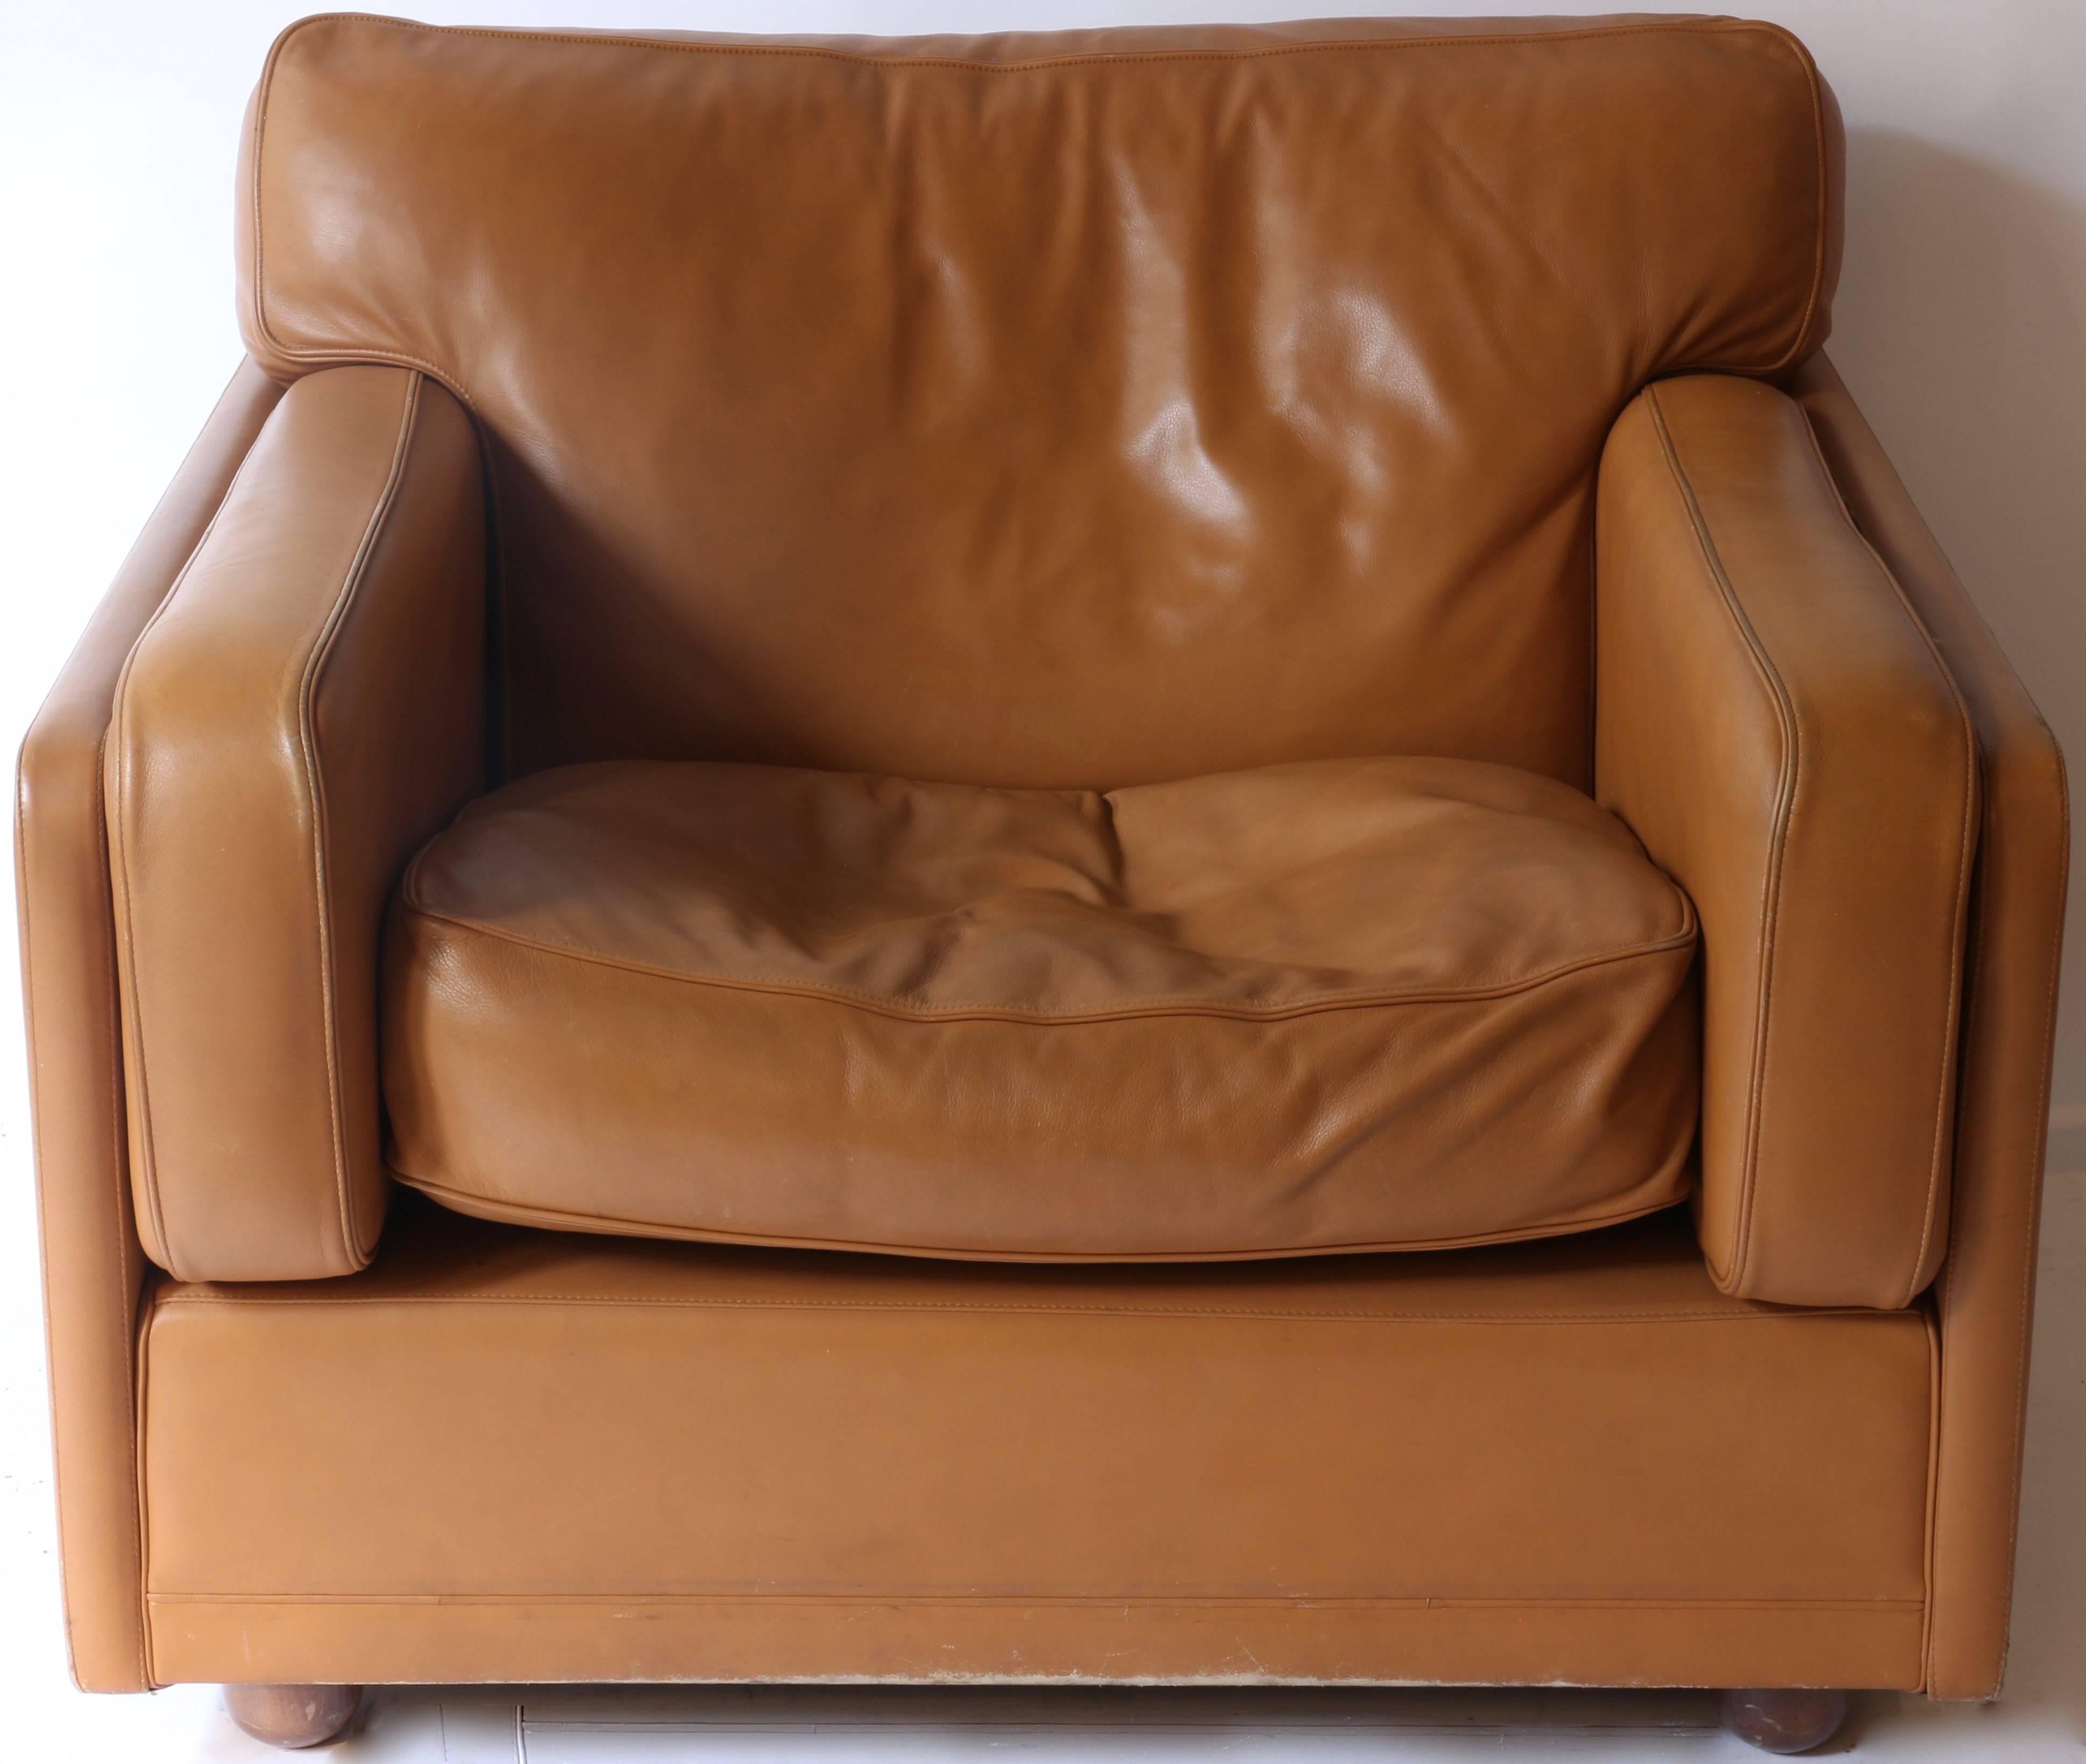 three leather club chairs, ( One sold
Italy, 1978 made by the manufacturer Poltrona Frau.
Beautiful light brown leather.